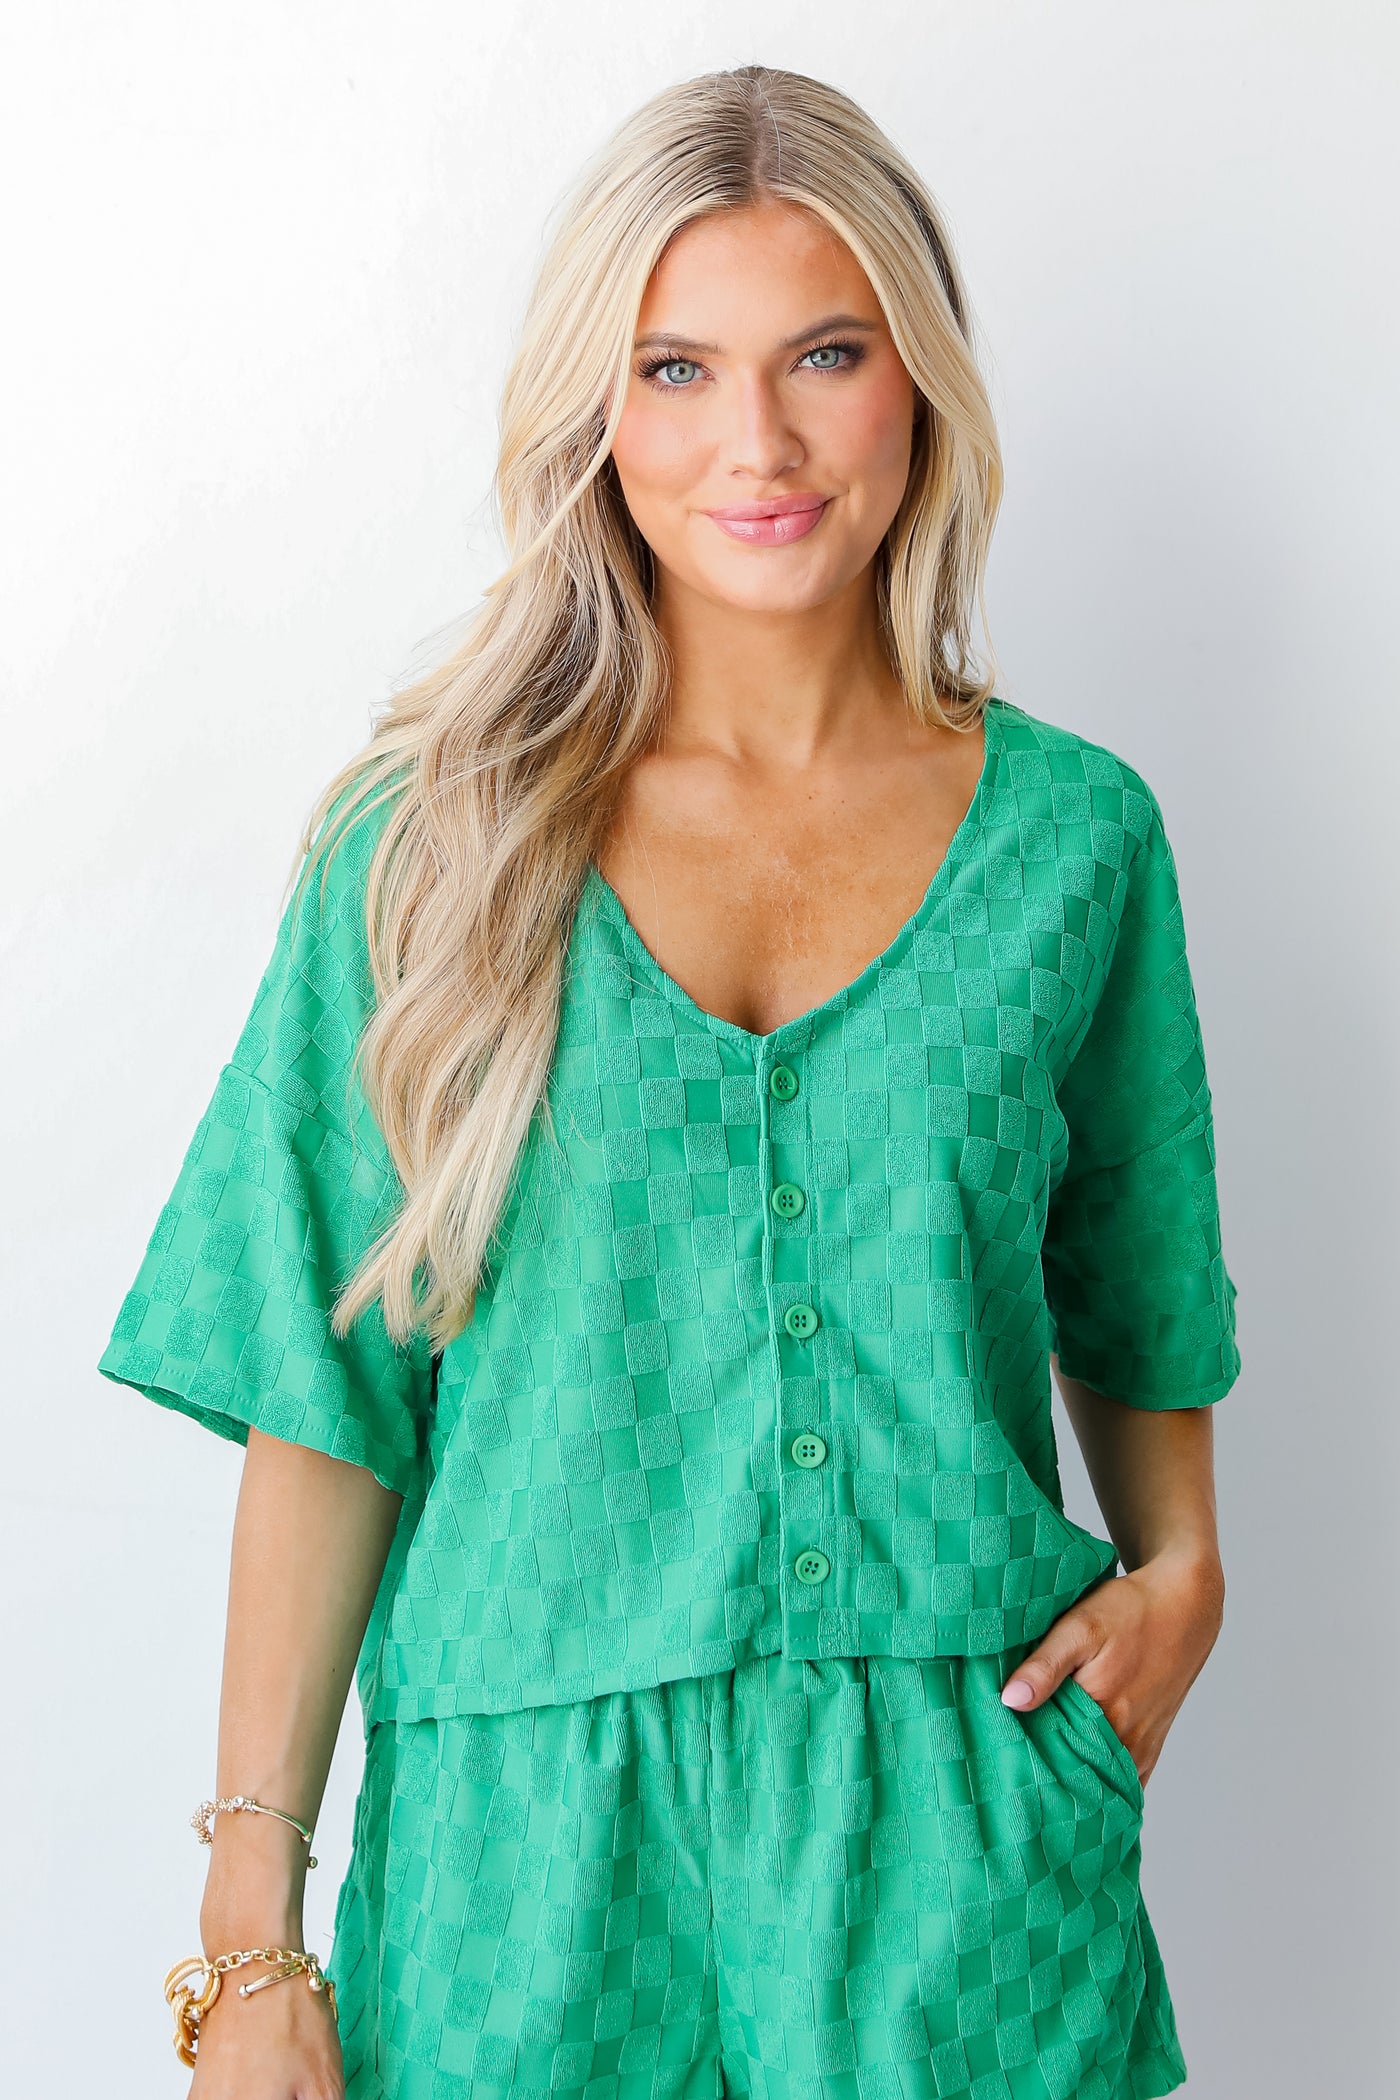 green Checkered Top on dress up model